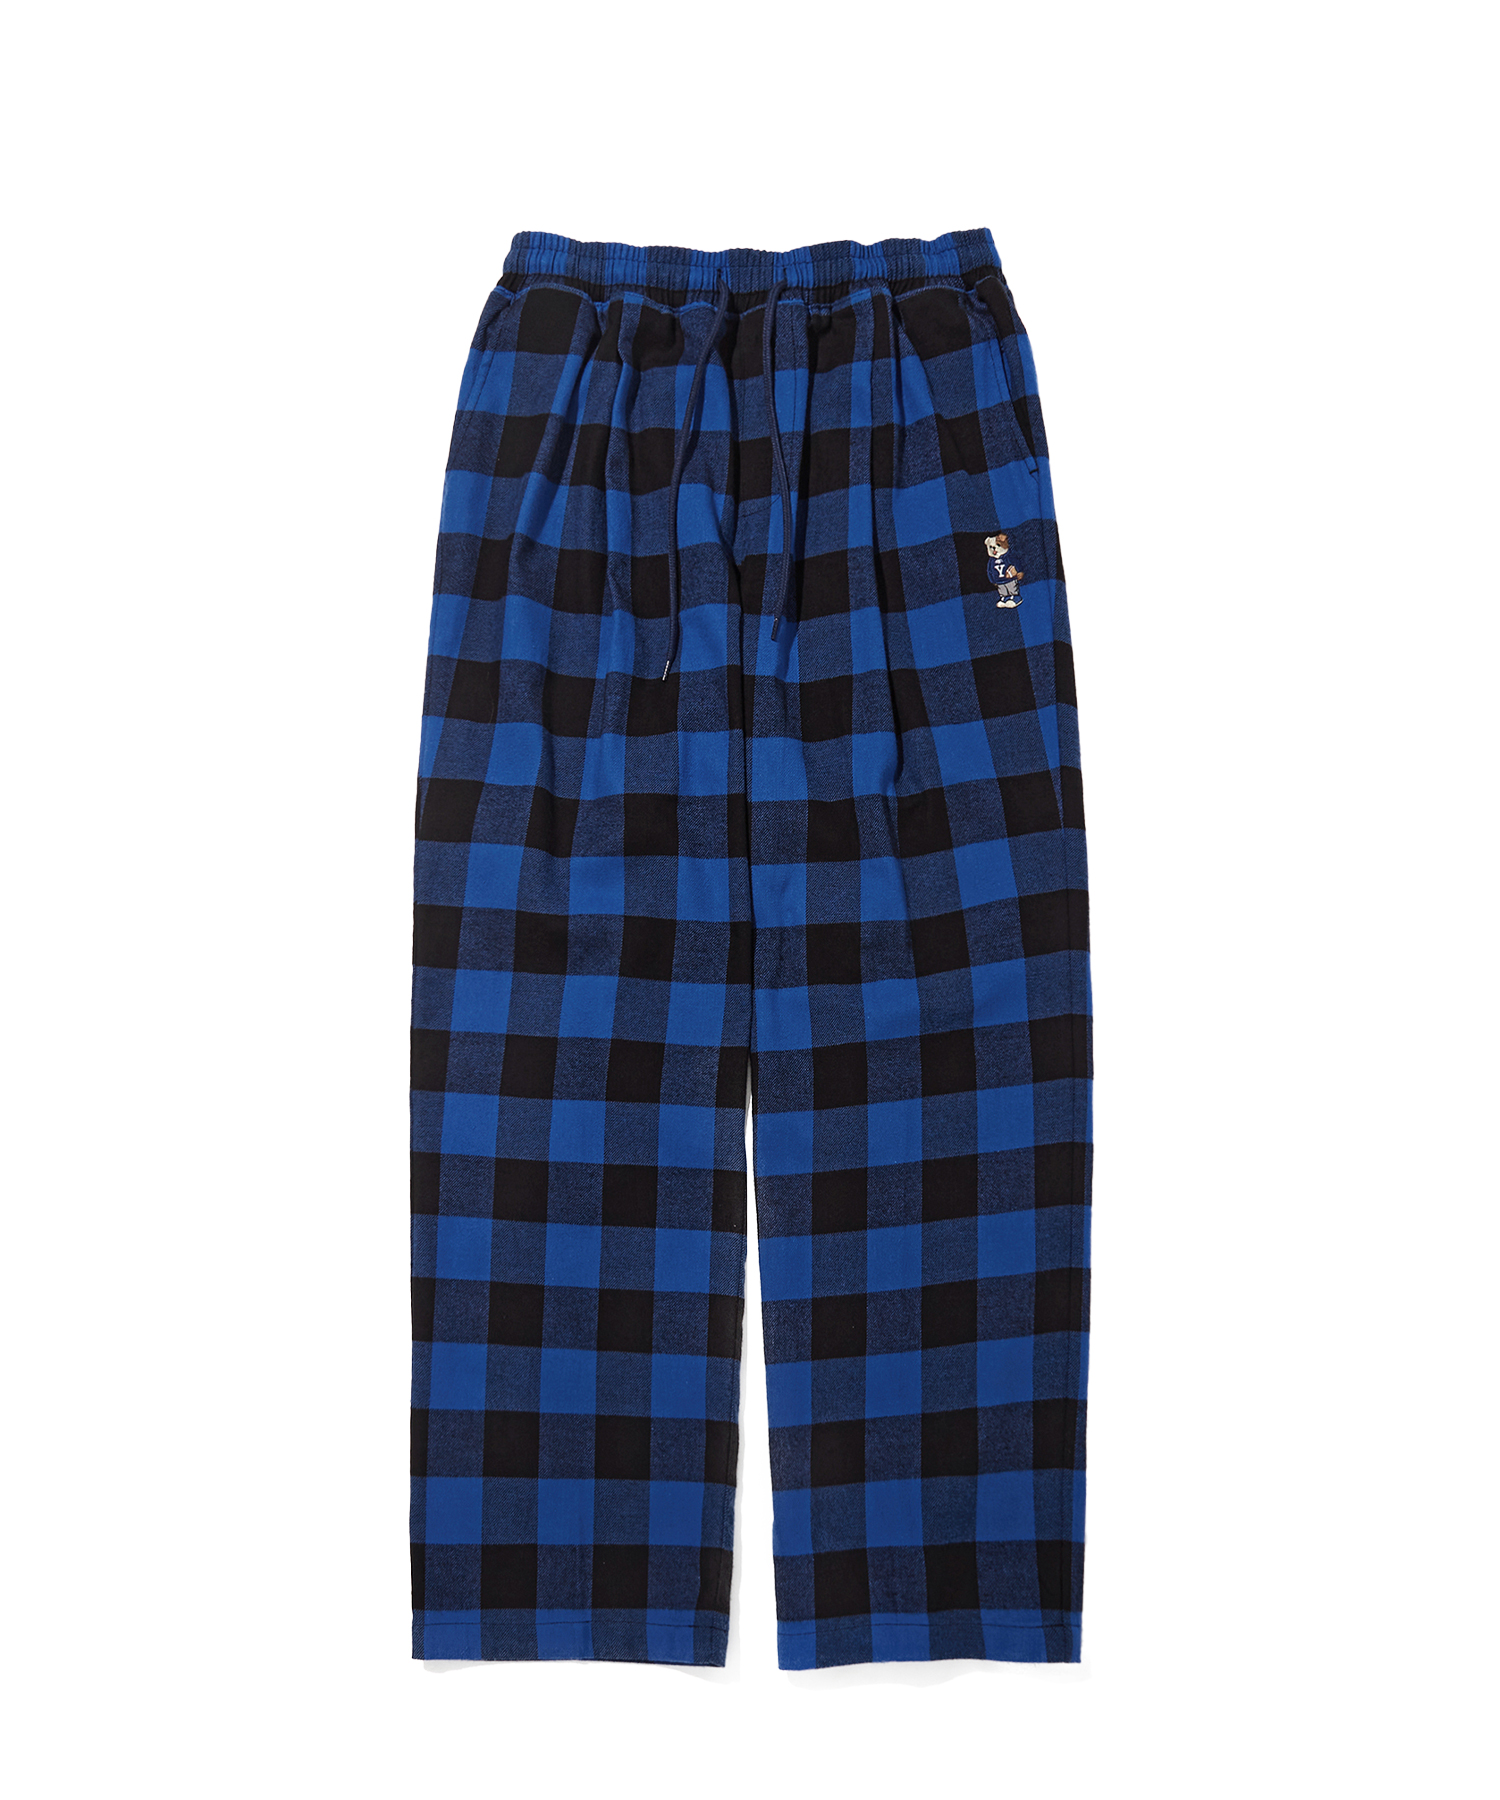 FLANNEL EASY PANTS CHECK BLUE